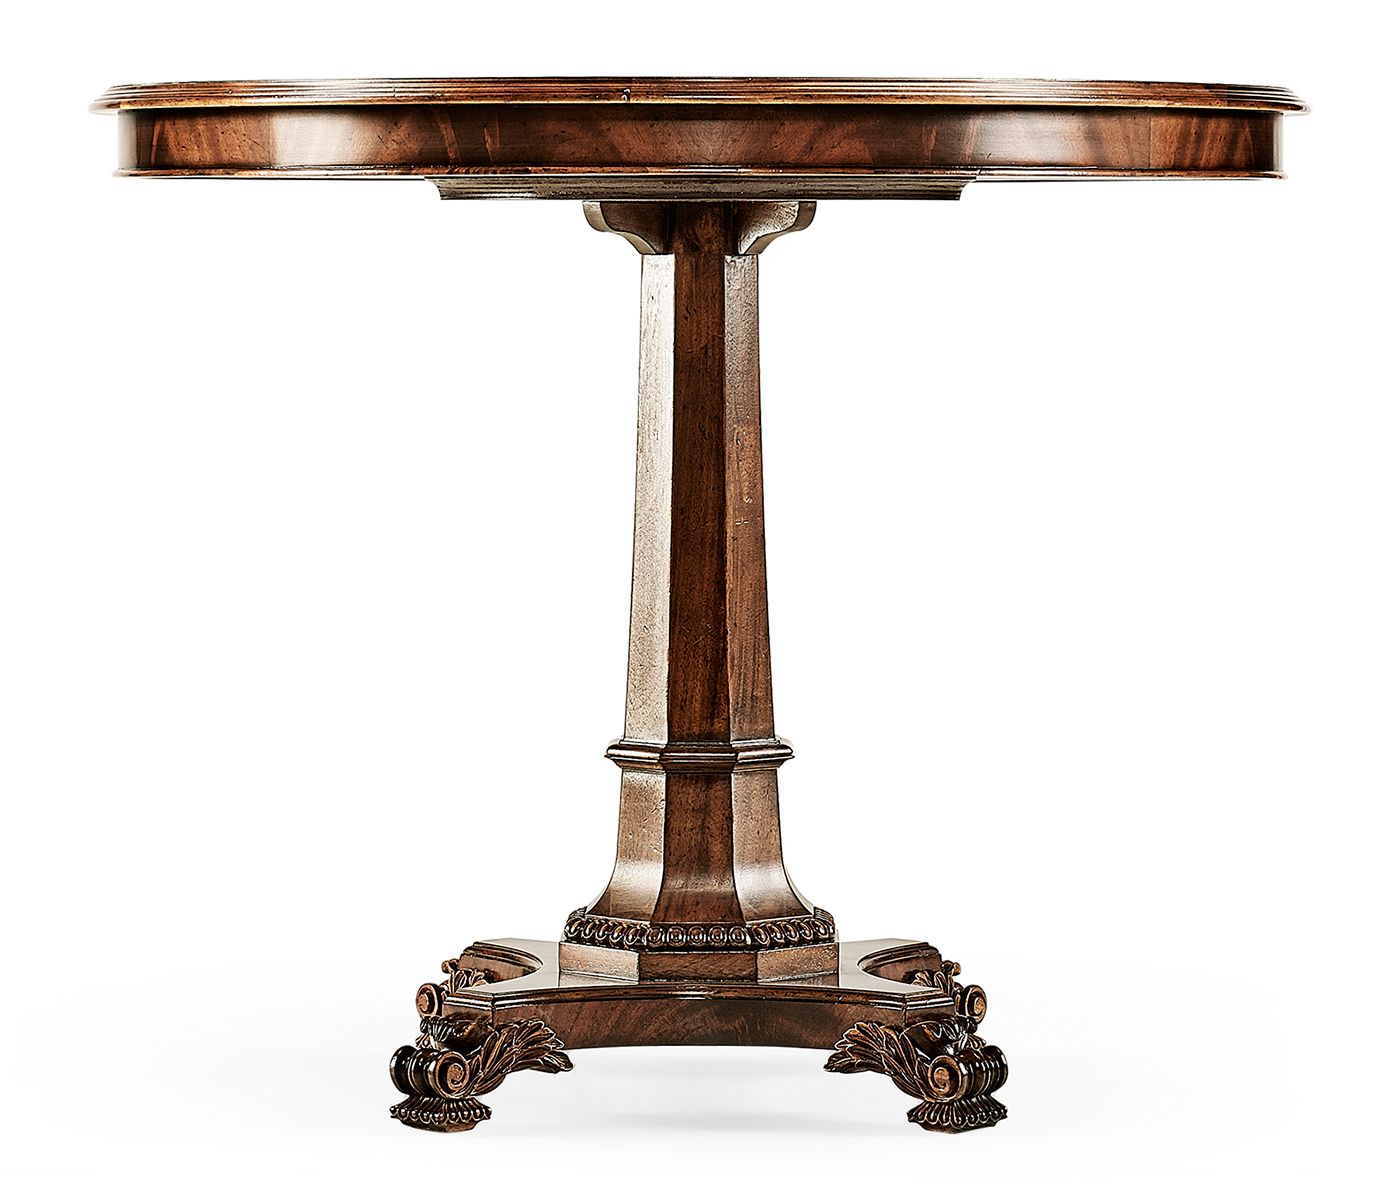 Regency Octagonal Pier Table With Favorite Octagon Console Tables (View 10 of 10)